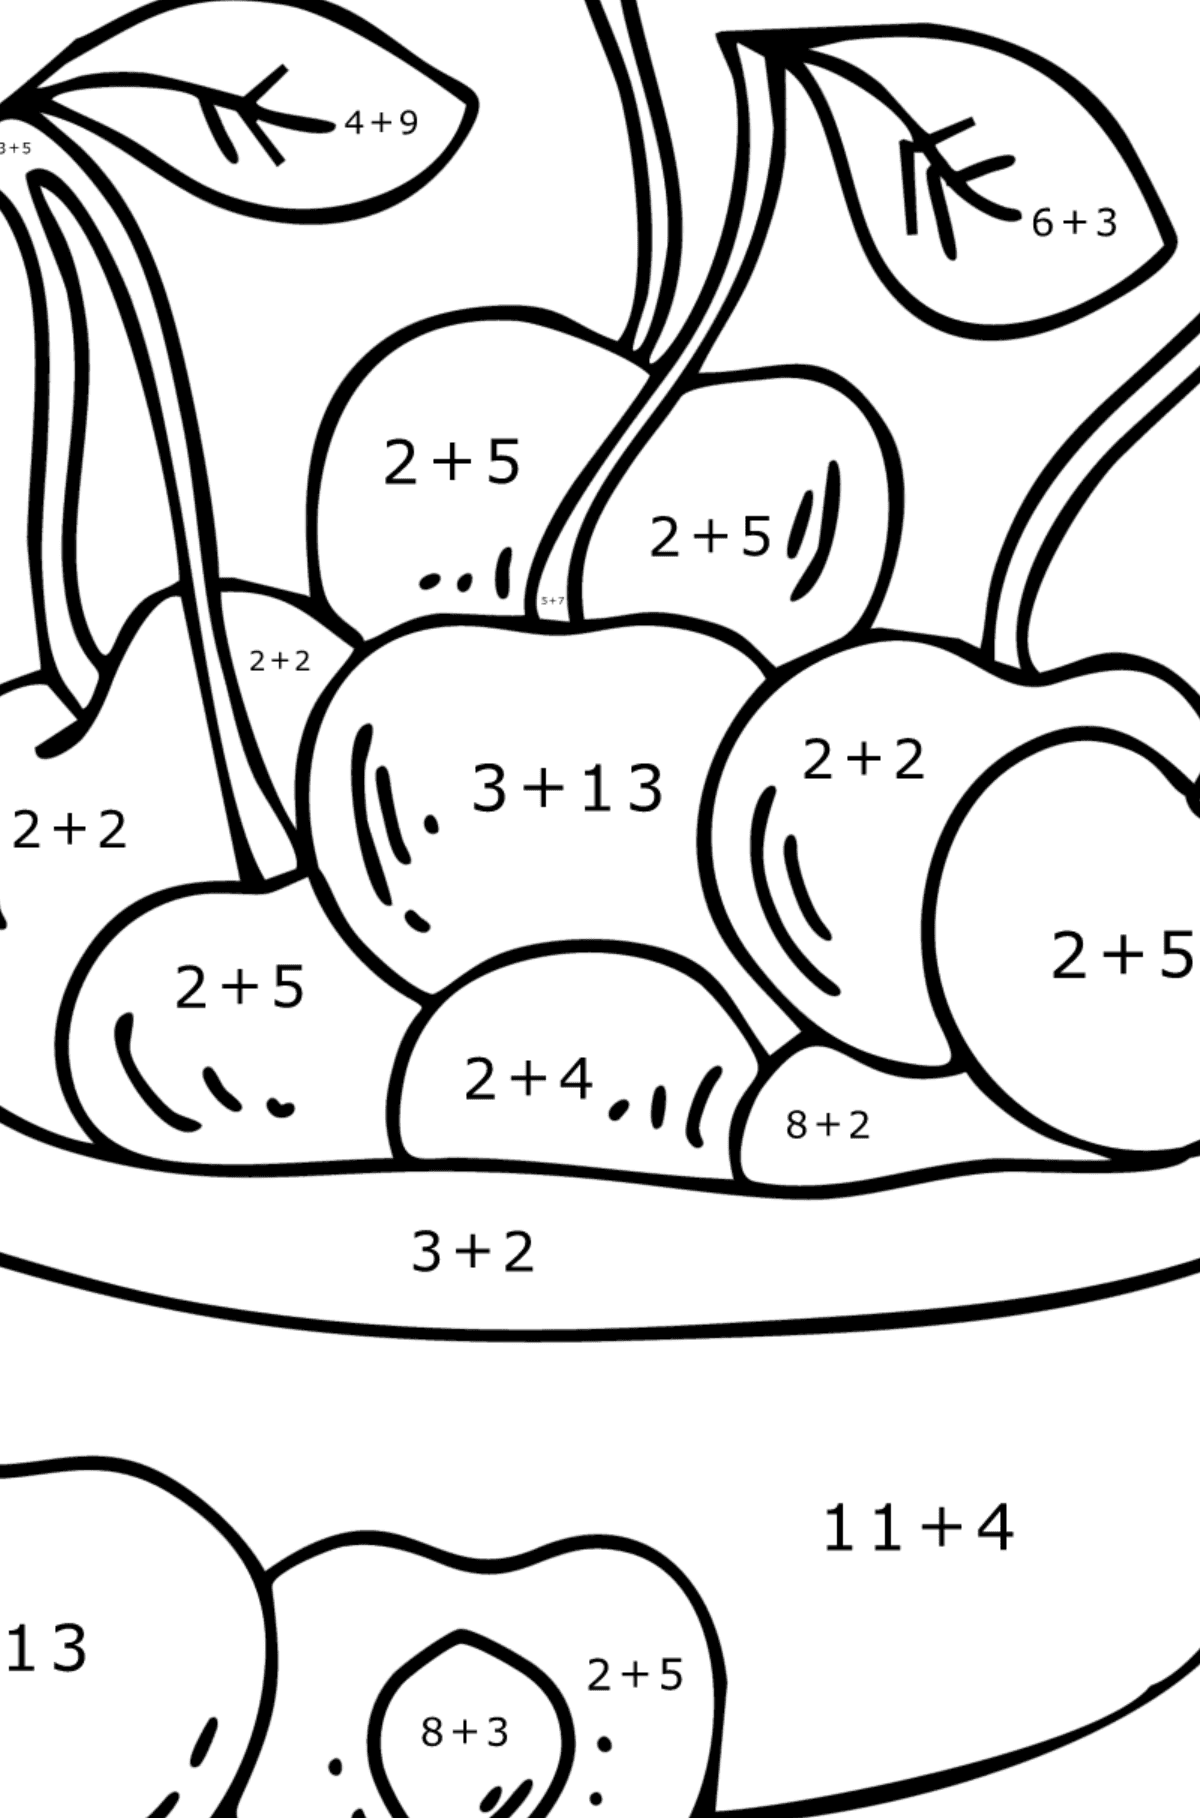 Cherries Plate Coloring Page - Math Coloring - Addition for Kids